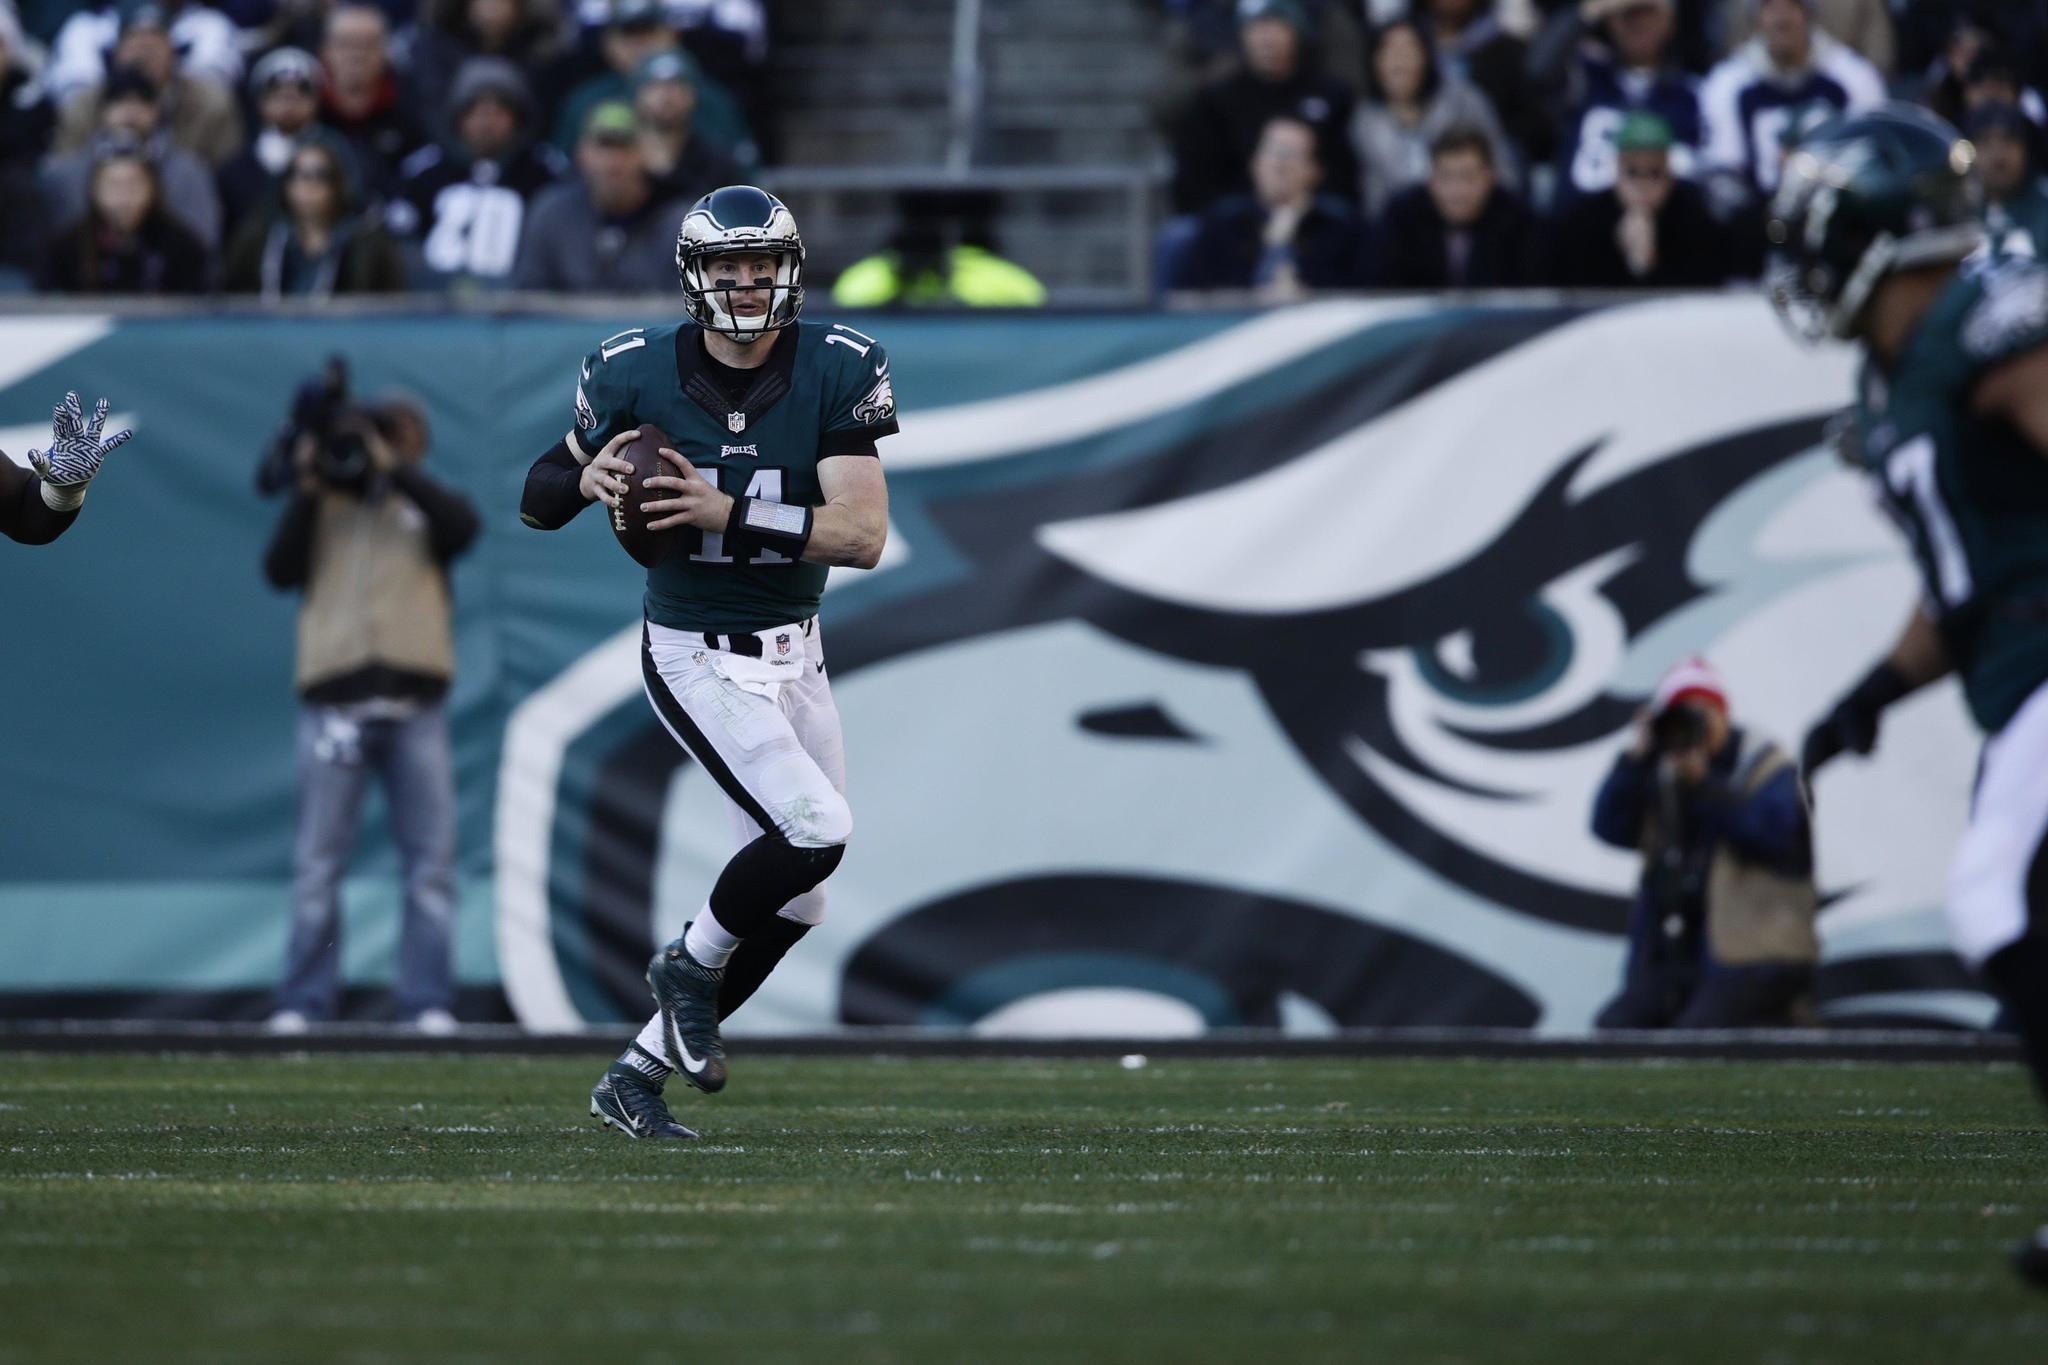 Staying sharp is Eagles QB Carson Wentz's top priority